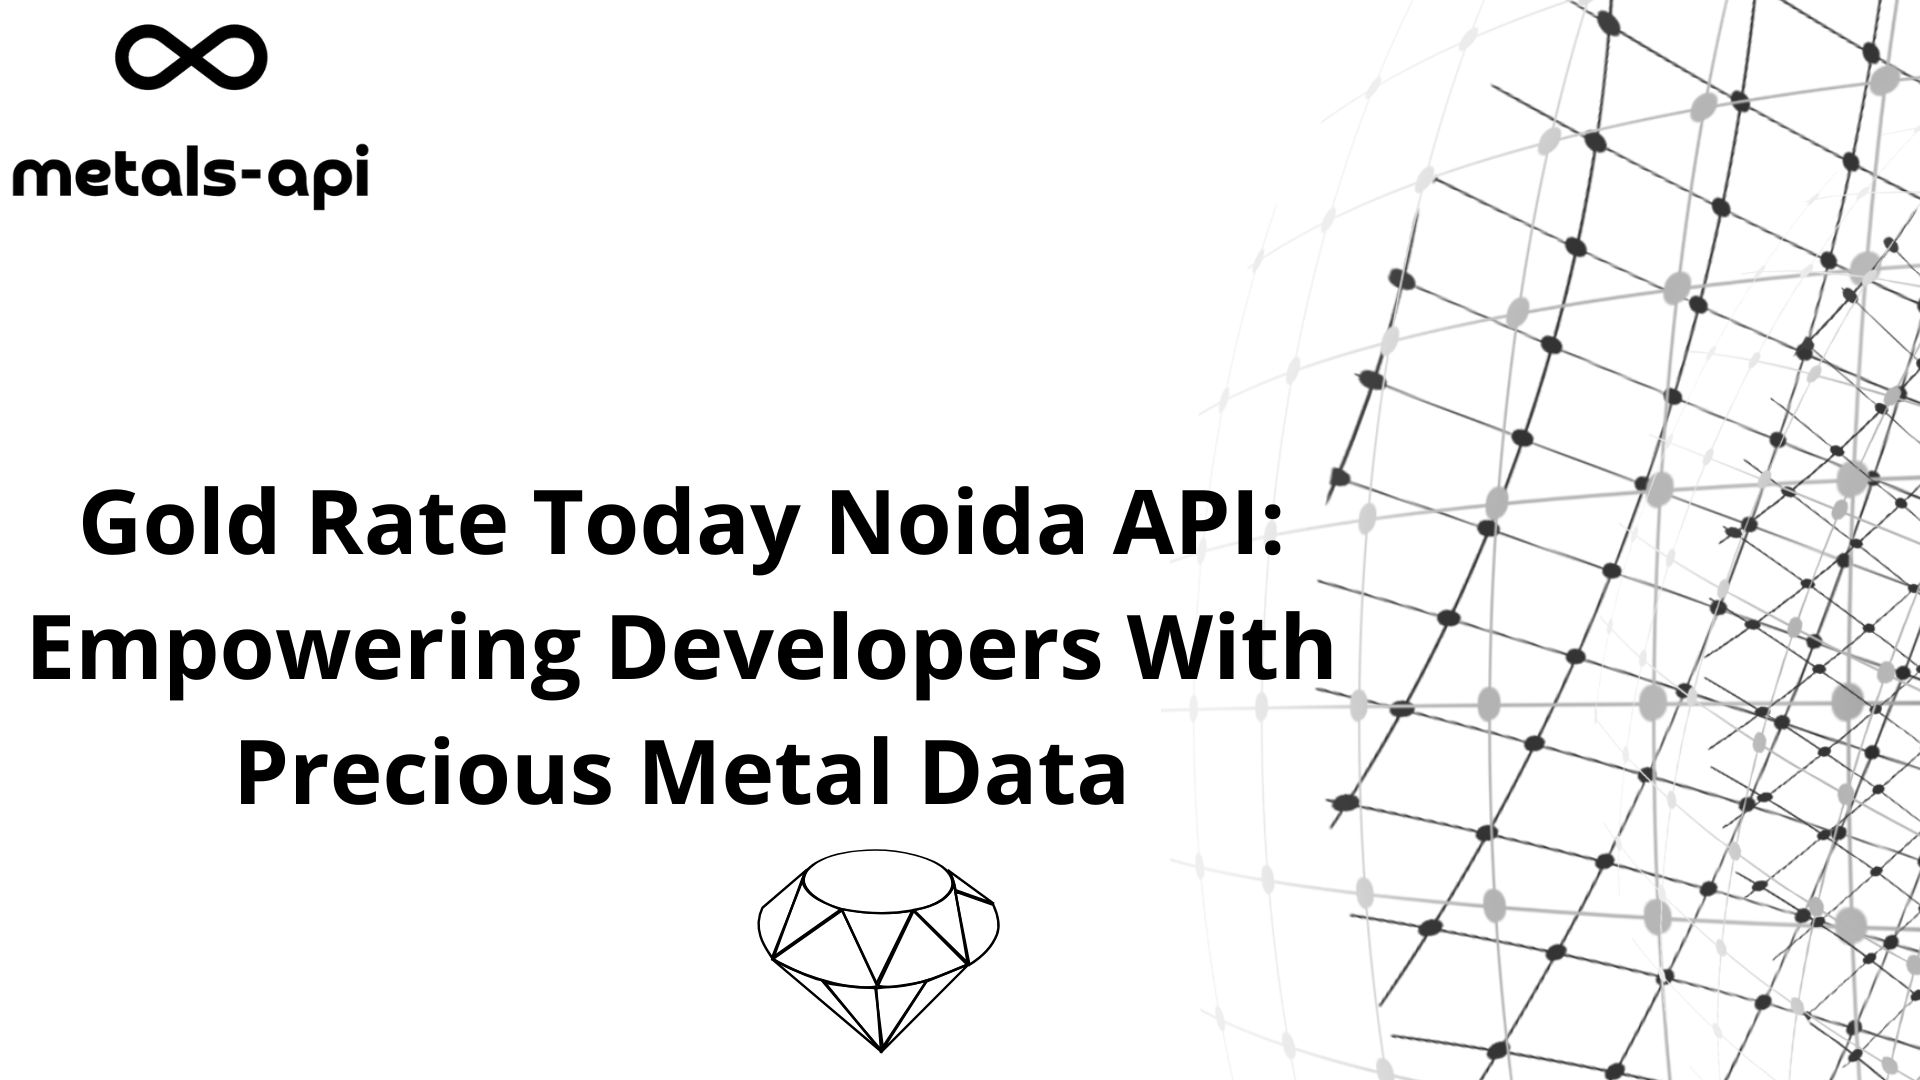 Gold Rate Today Noida API: Empowering Developers With Precious Metal Data